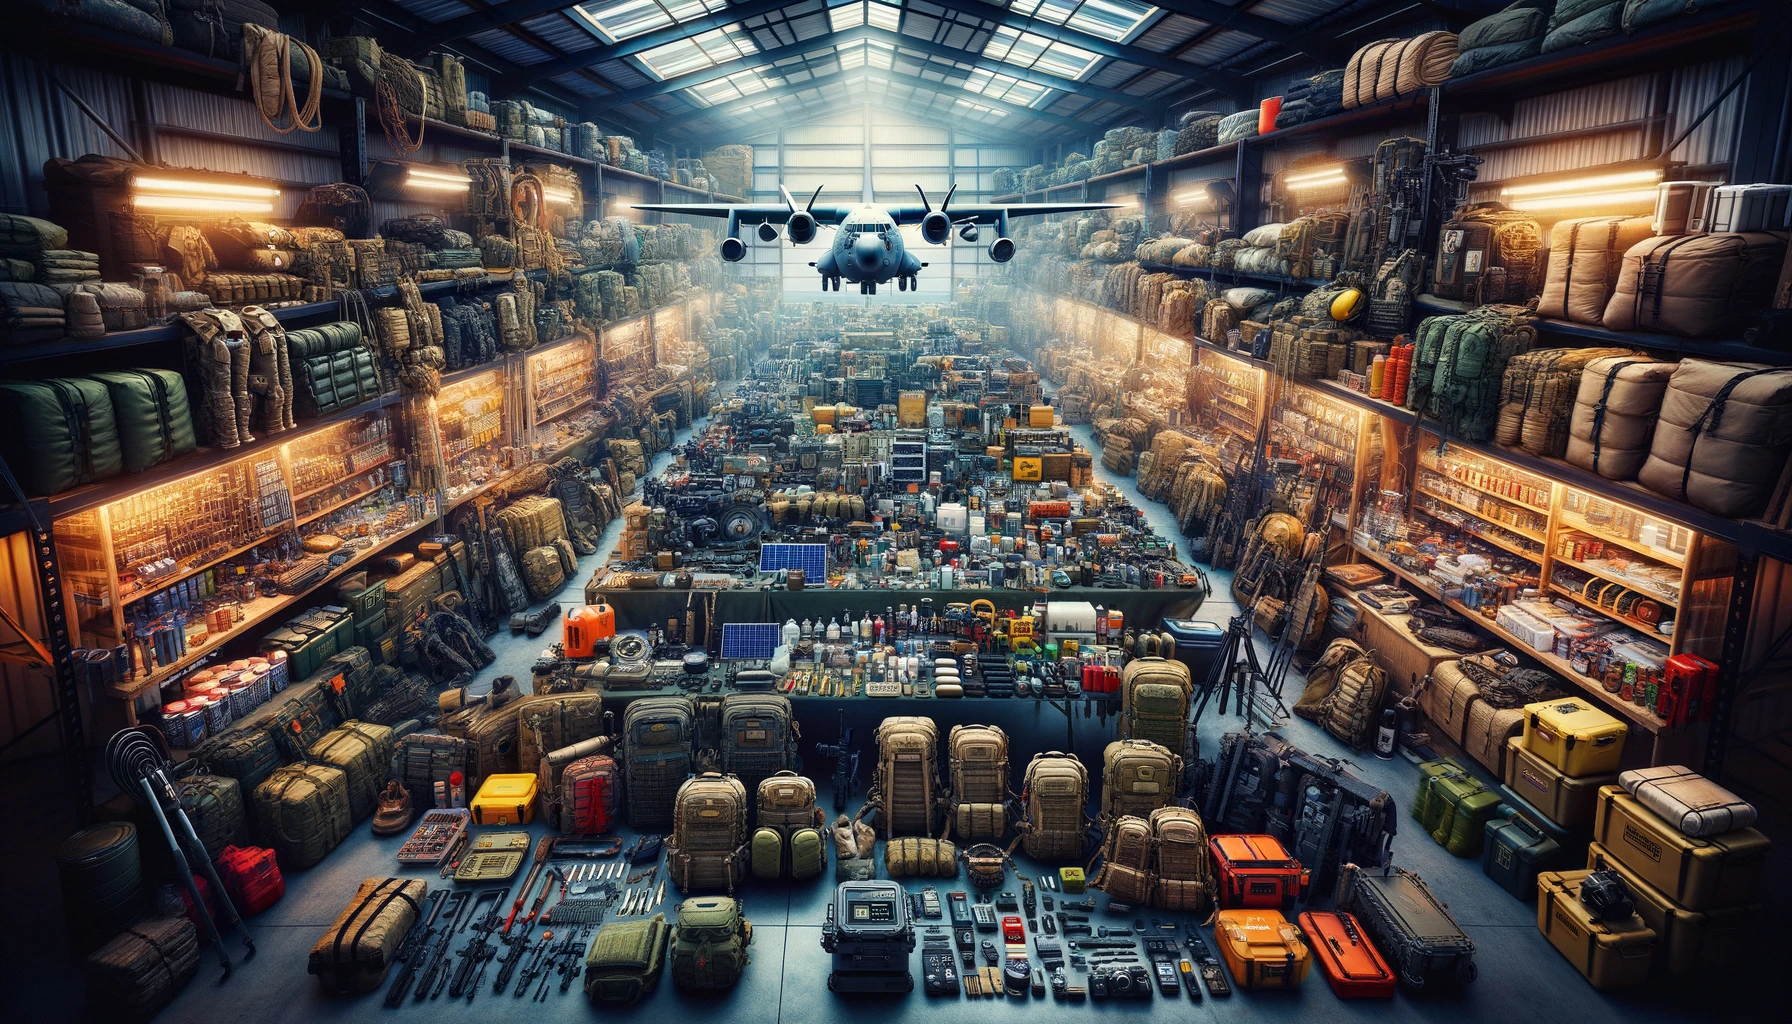 Epic display of a comprehensive prepper's arsenal in a secure warehouse, featuring an organized array of survival gear, tactical equipment, backpacks ready for various scenarios, non-perishable food supplies, water purification systems, extensive medical supplies, communication devices, and power generation tools, highlighting meticulous organization and the pursuit of ultimate preparedness and self-sufficiency